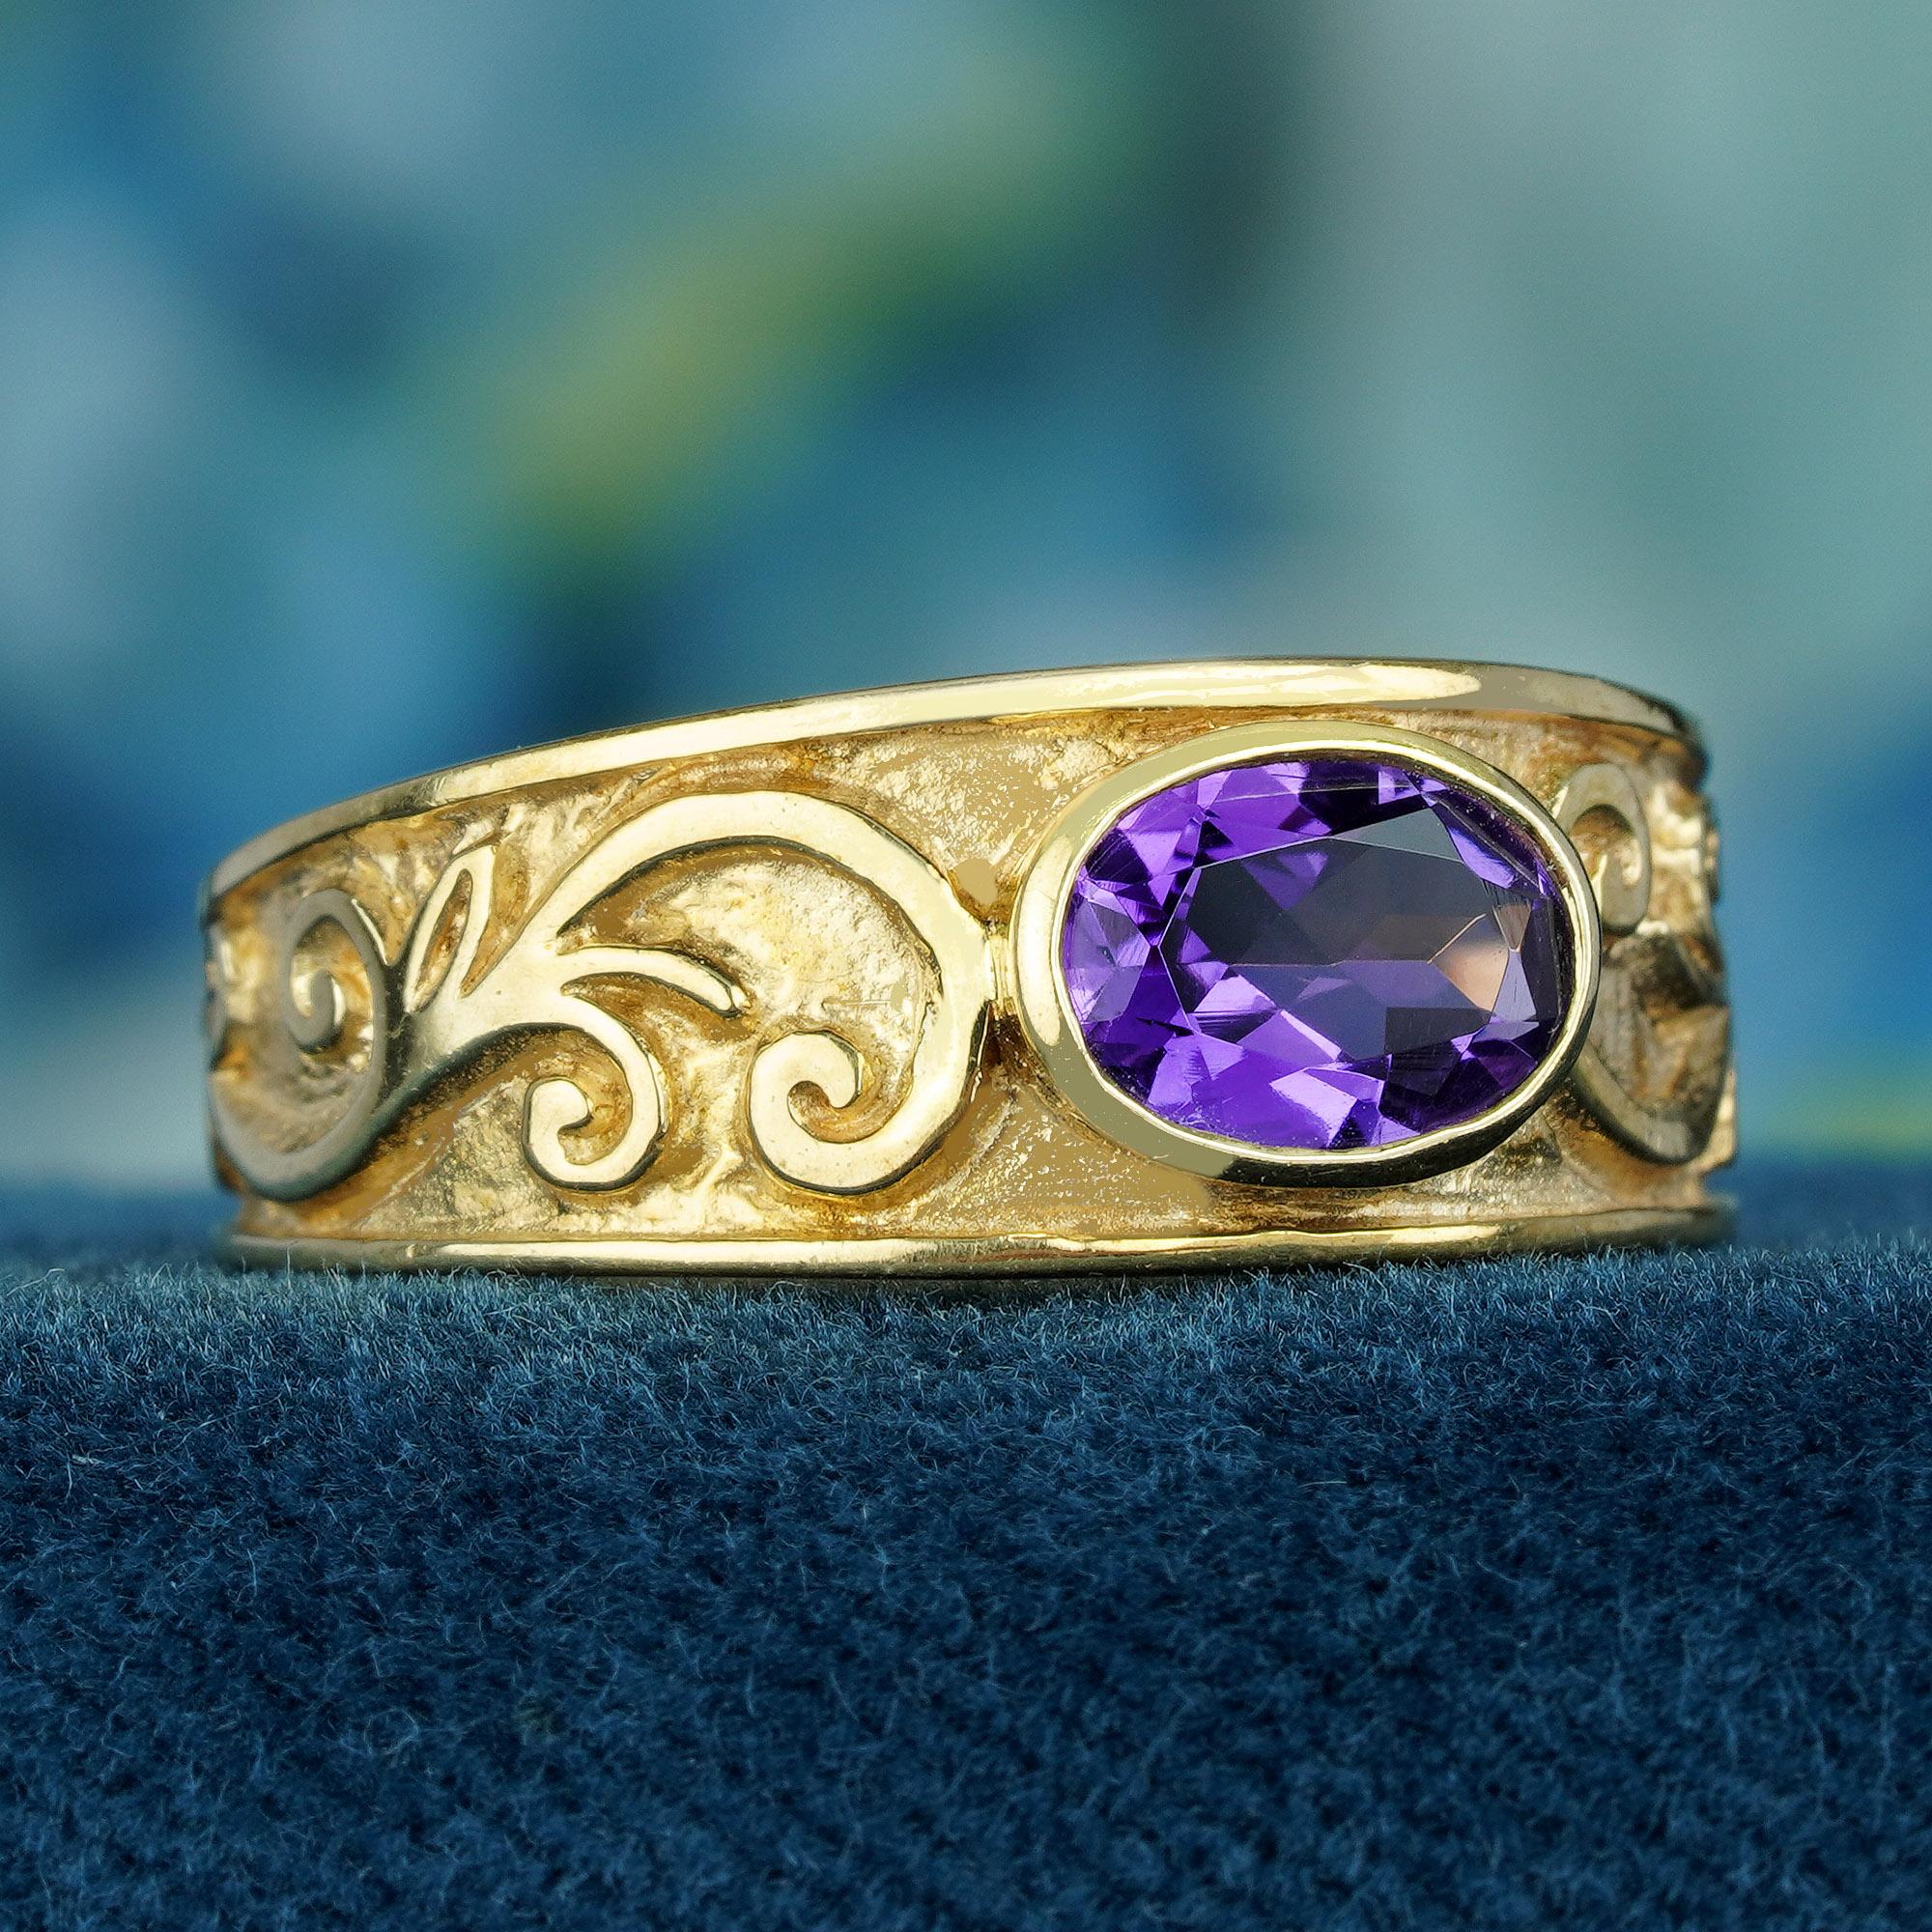 The ring highlights a natural oval-shaped amethyst, displaying a vibrant purple hue, set in a solid yellow gold band with an ornate carved in scrollwork design that enhances its antique aesthetic. The overall appearance of the ring is elegant and